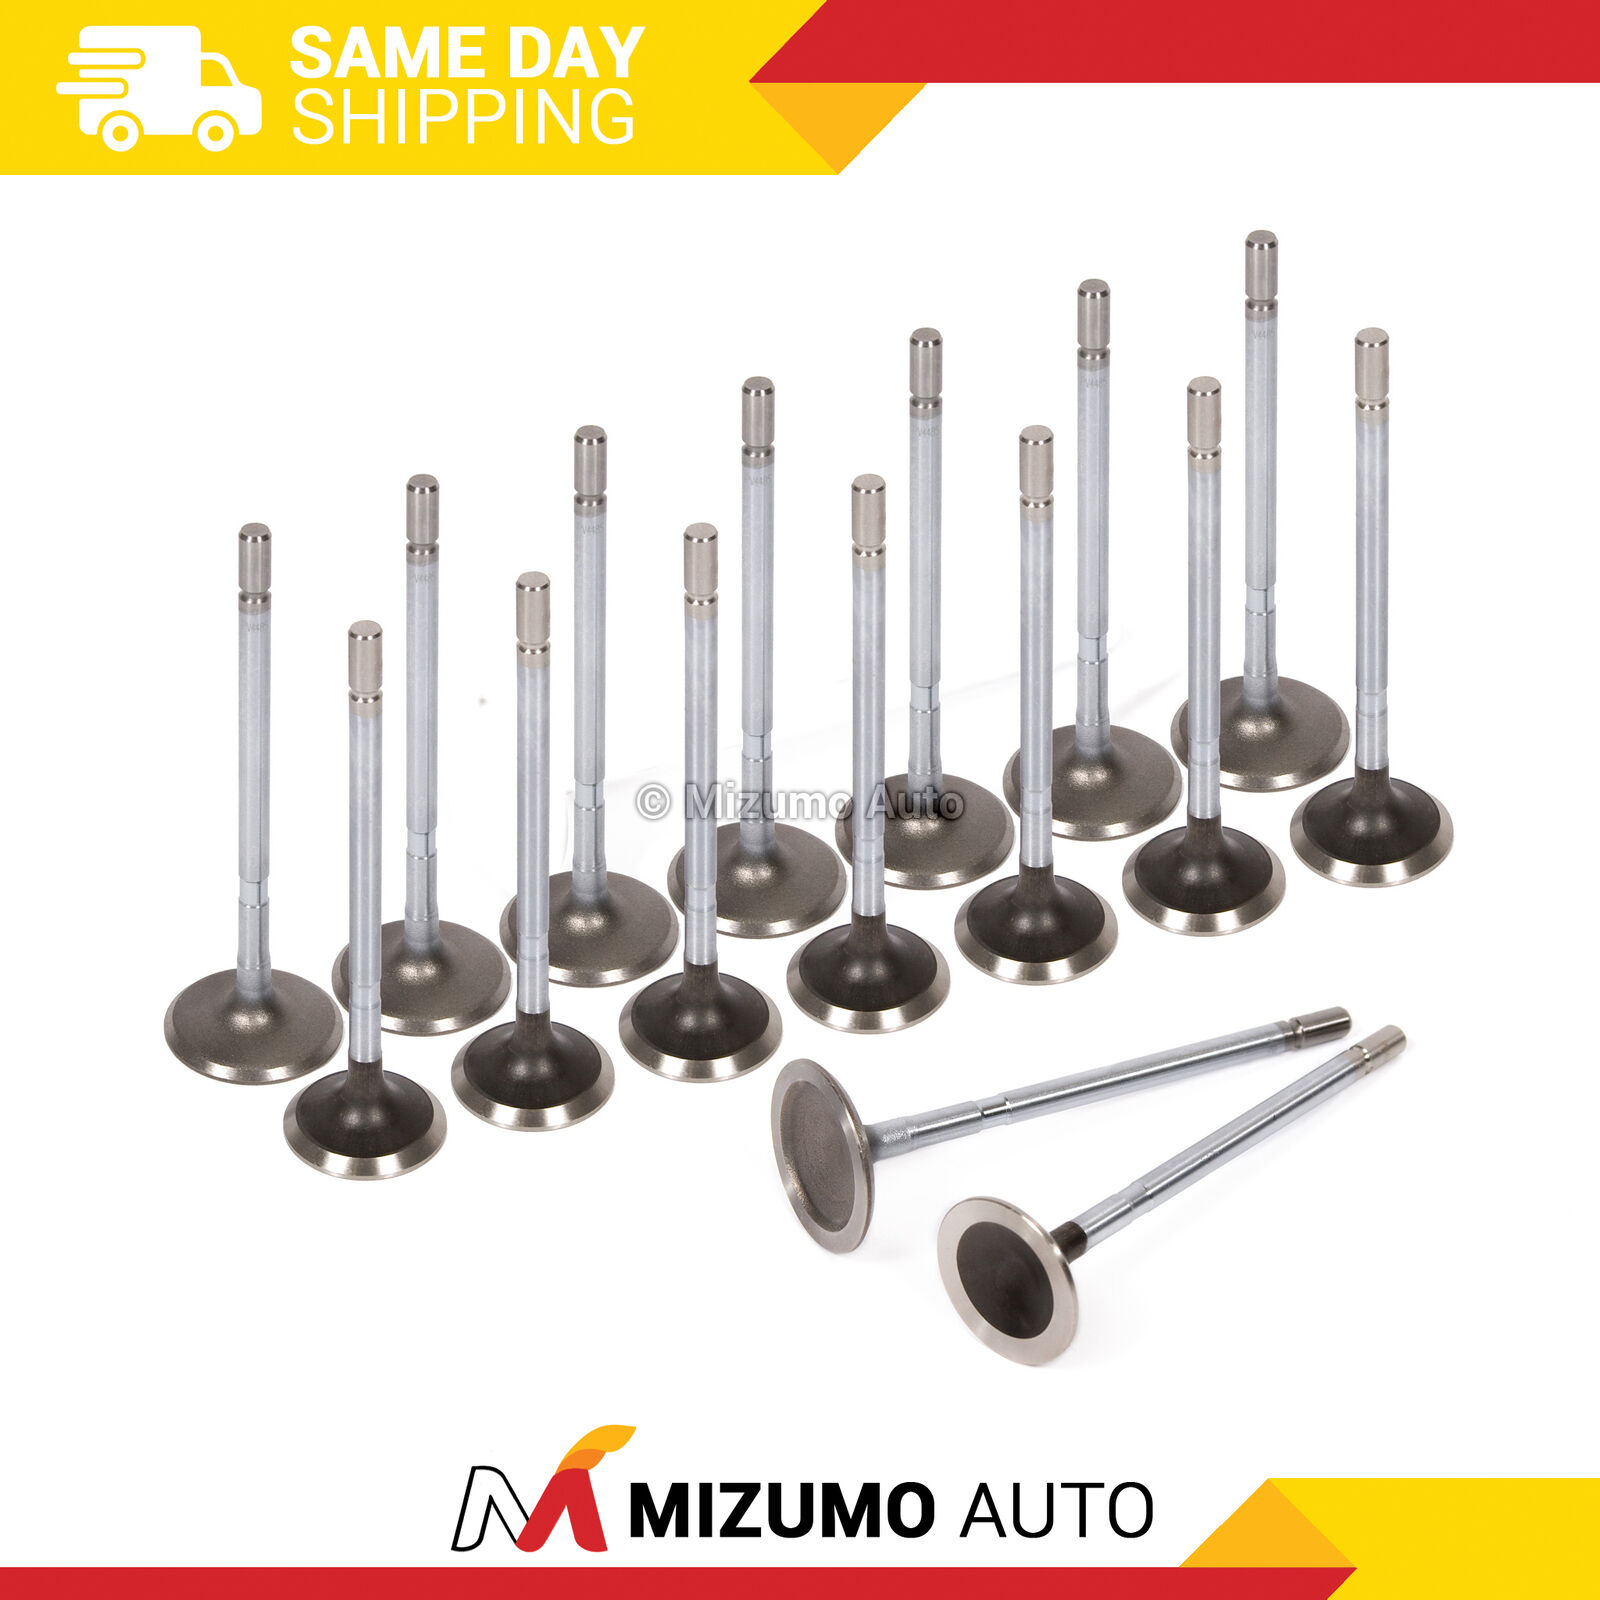 Intake Exhaust Valves Fit Dodge Mitsubishi Eagle Plymouth 2.0 2.4 DOHC 420A 16V